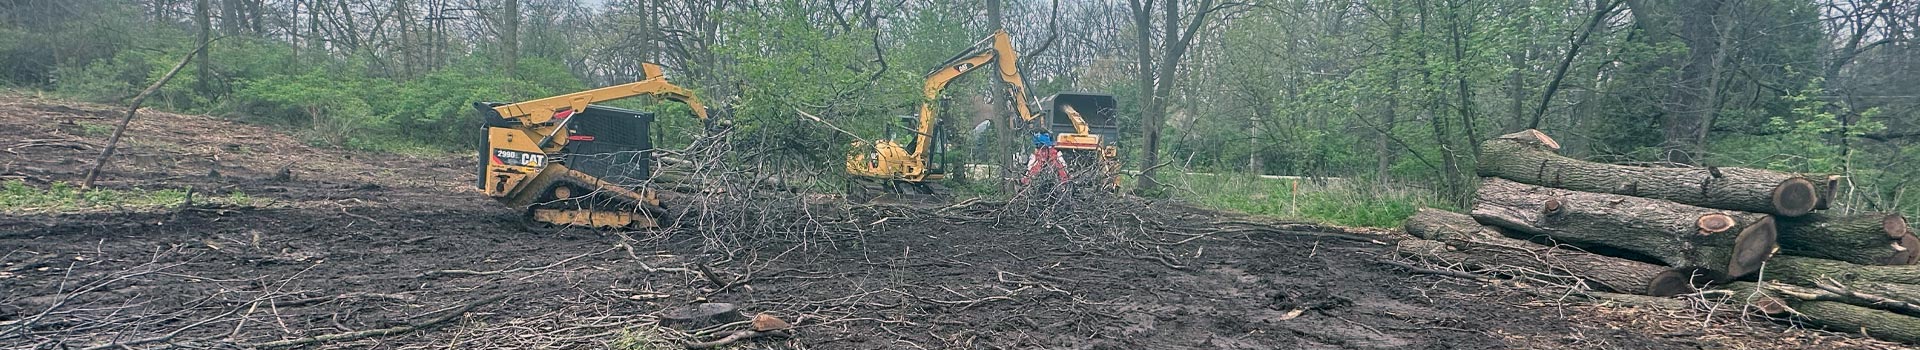 Tree Clearing & Grubbing